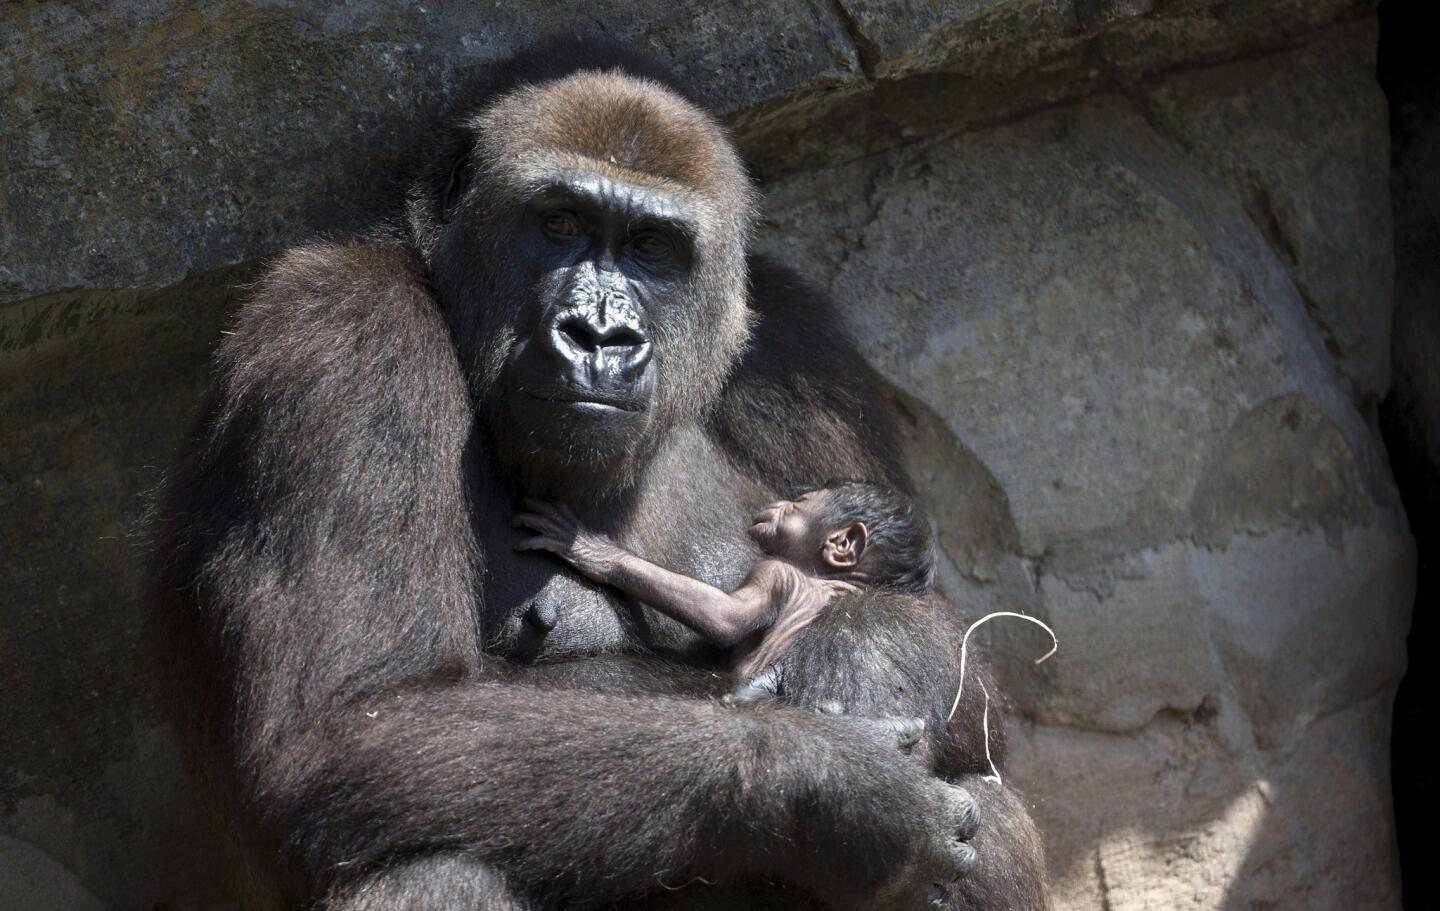 Ten-year-old gorilla Nalani holds her baby in her enclosure at Bioparc zoo in Valencia, Spain, on Aug. 18, 2016. Nalani gave birth on Aug. 17.